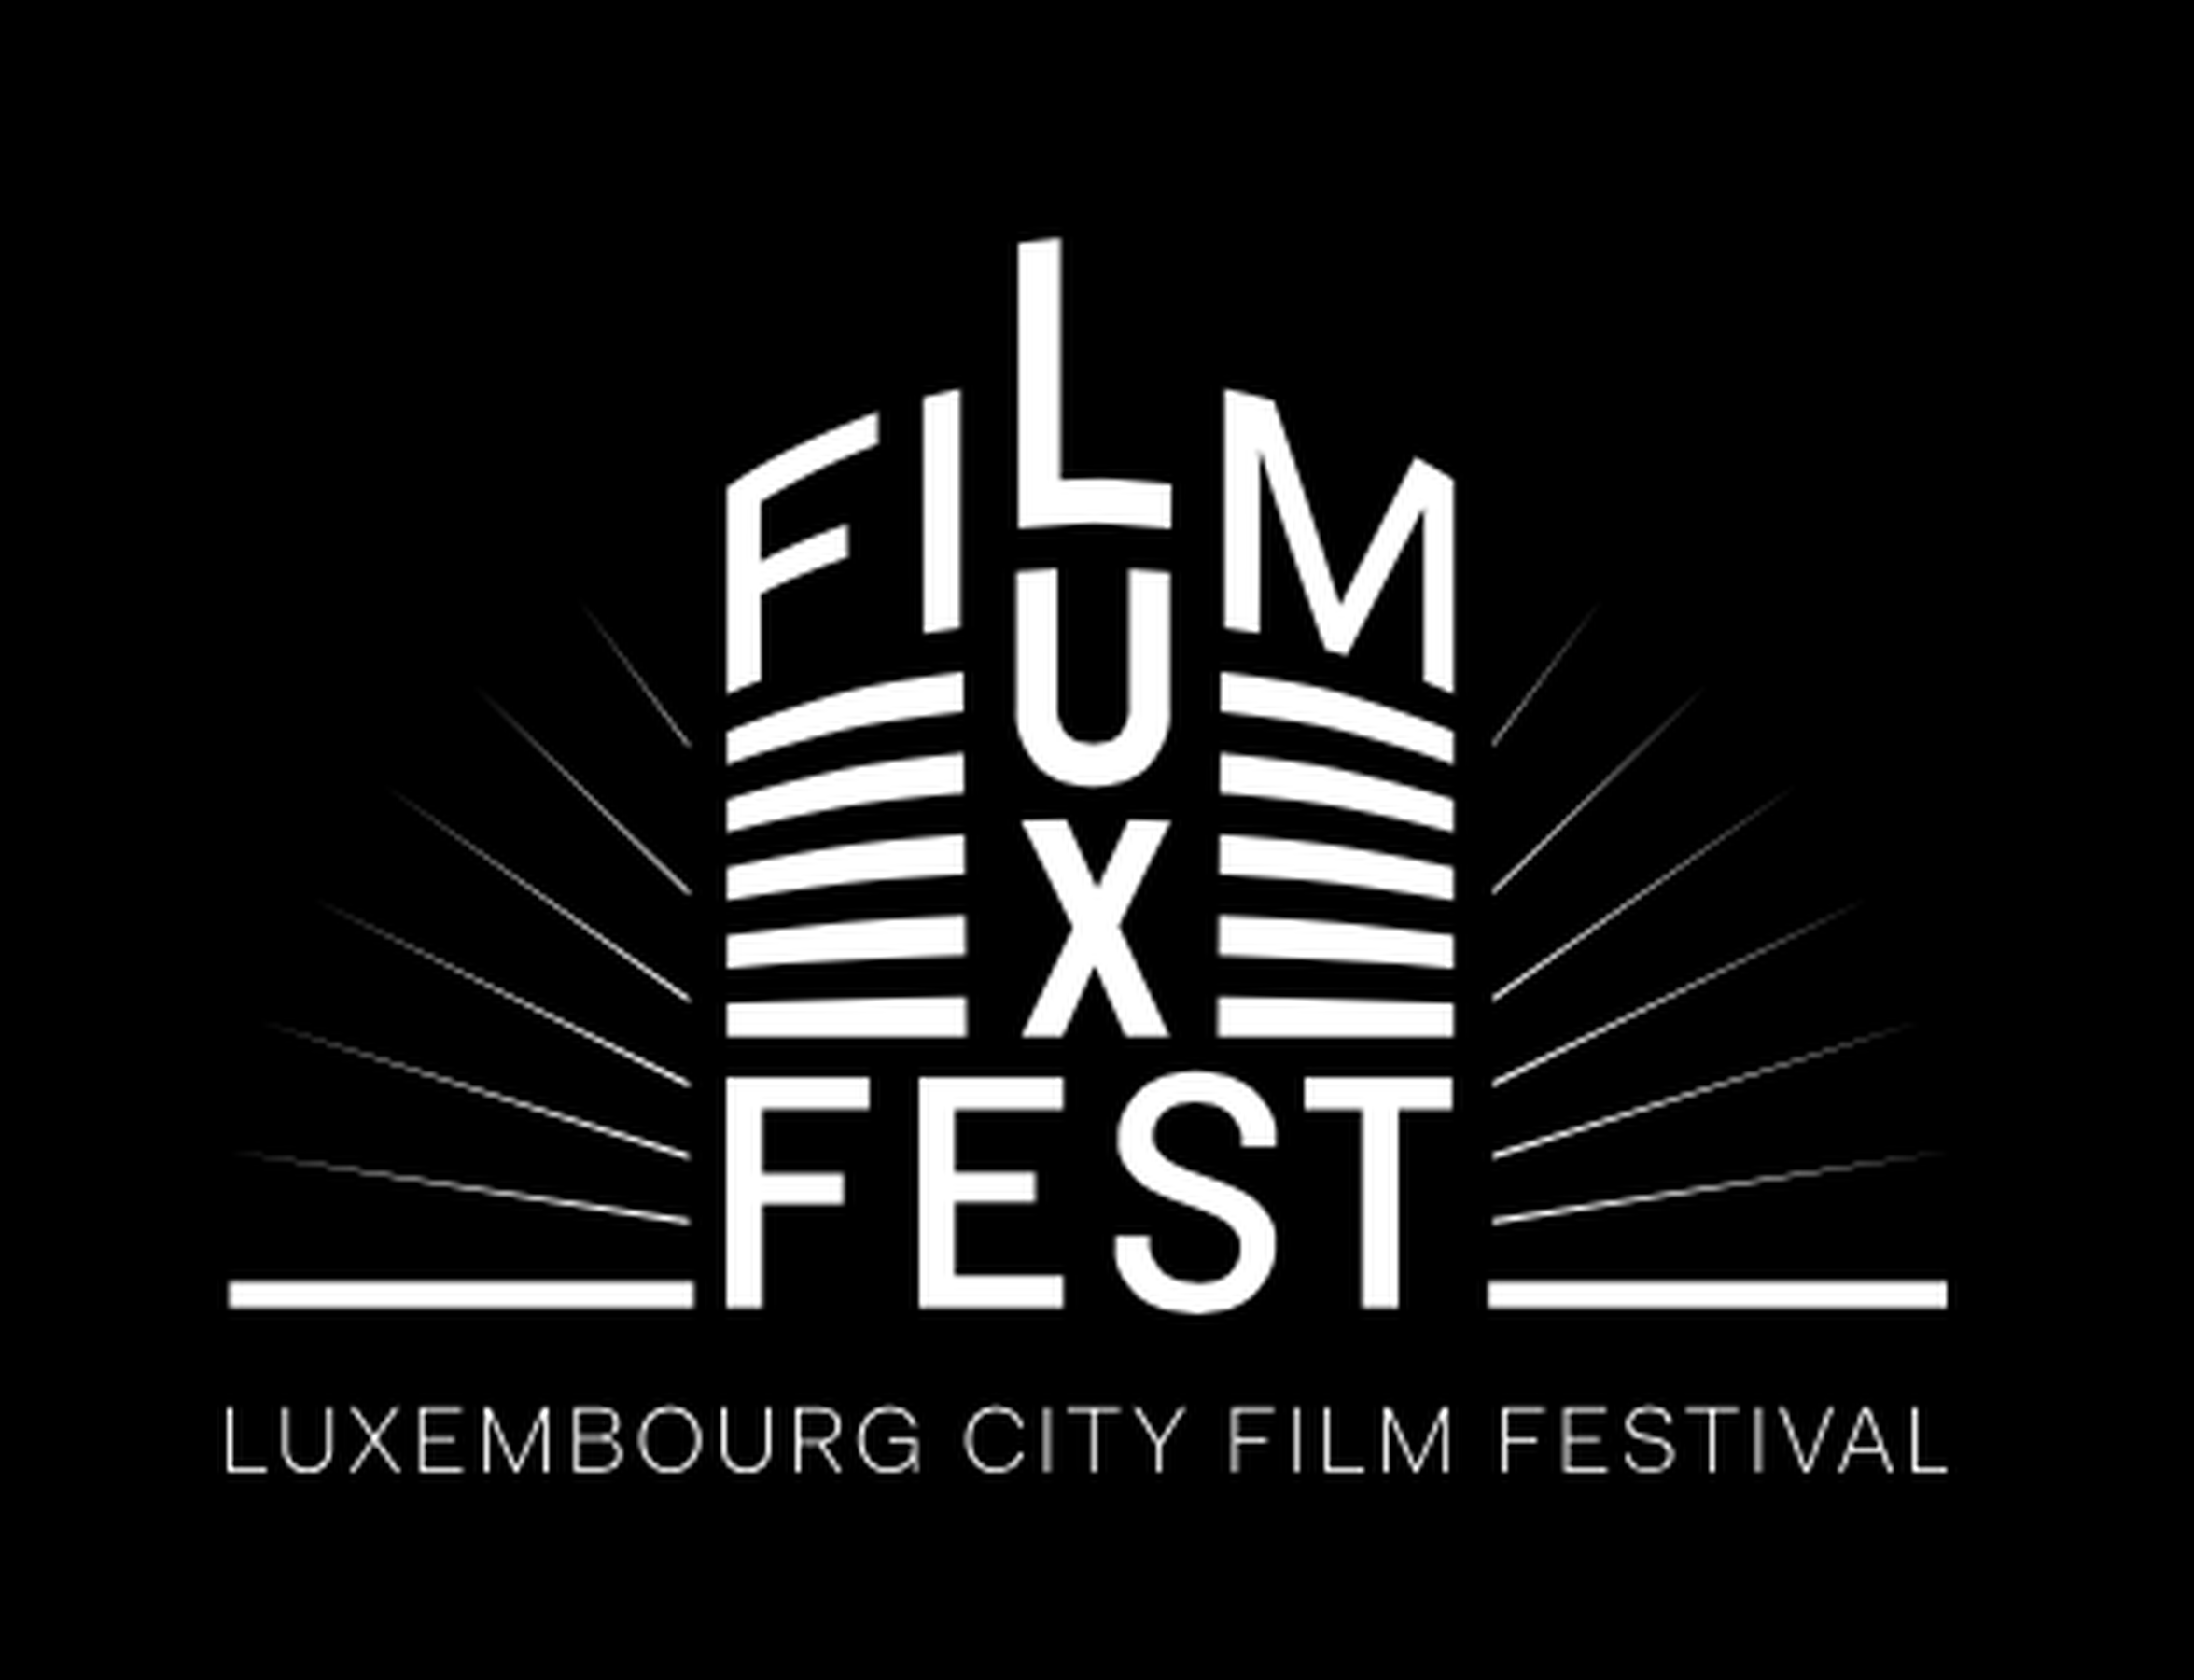 If I could wish for something - Luxembourg City Film Festival